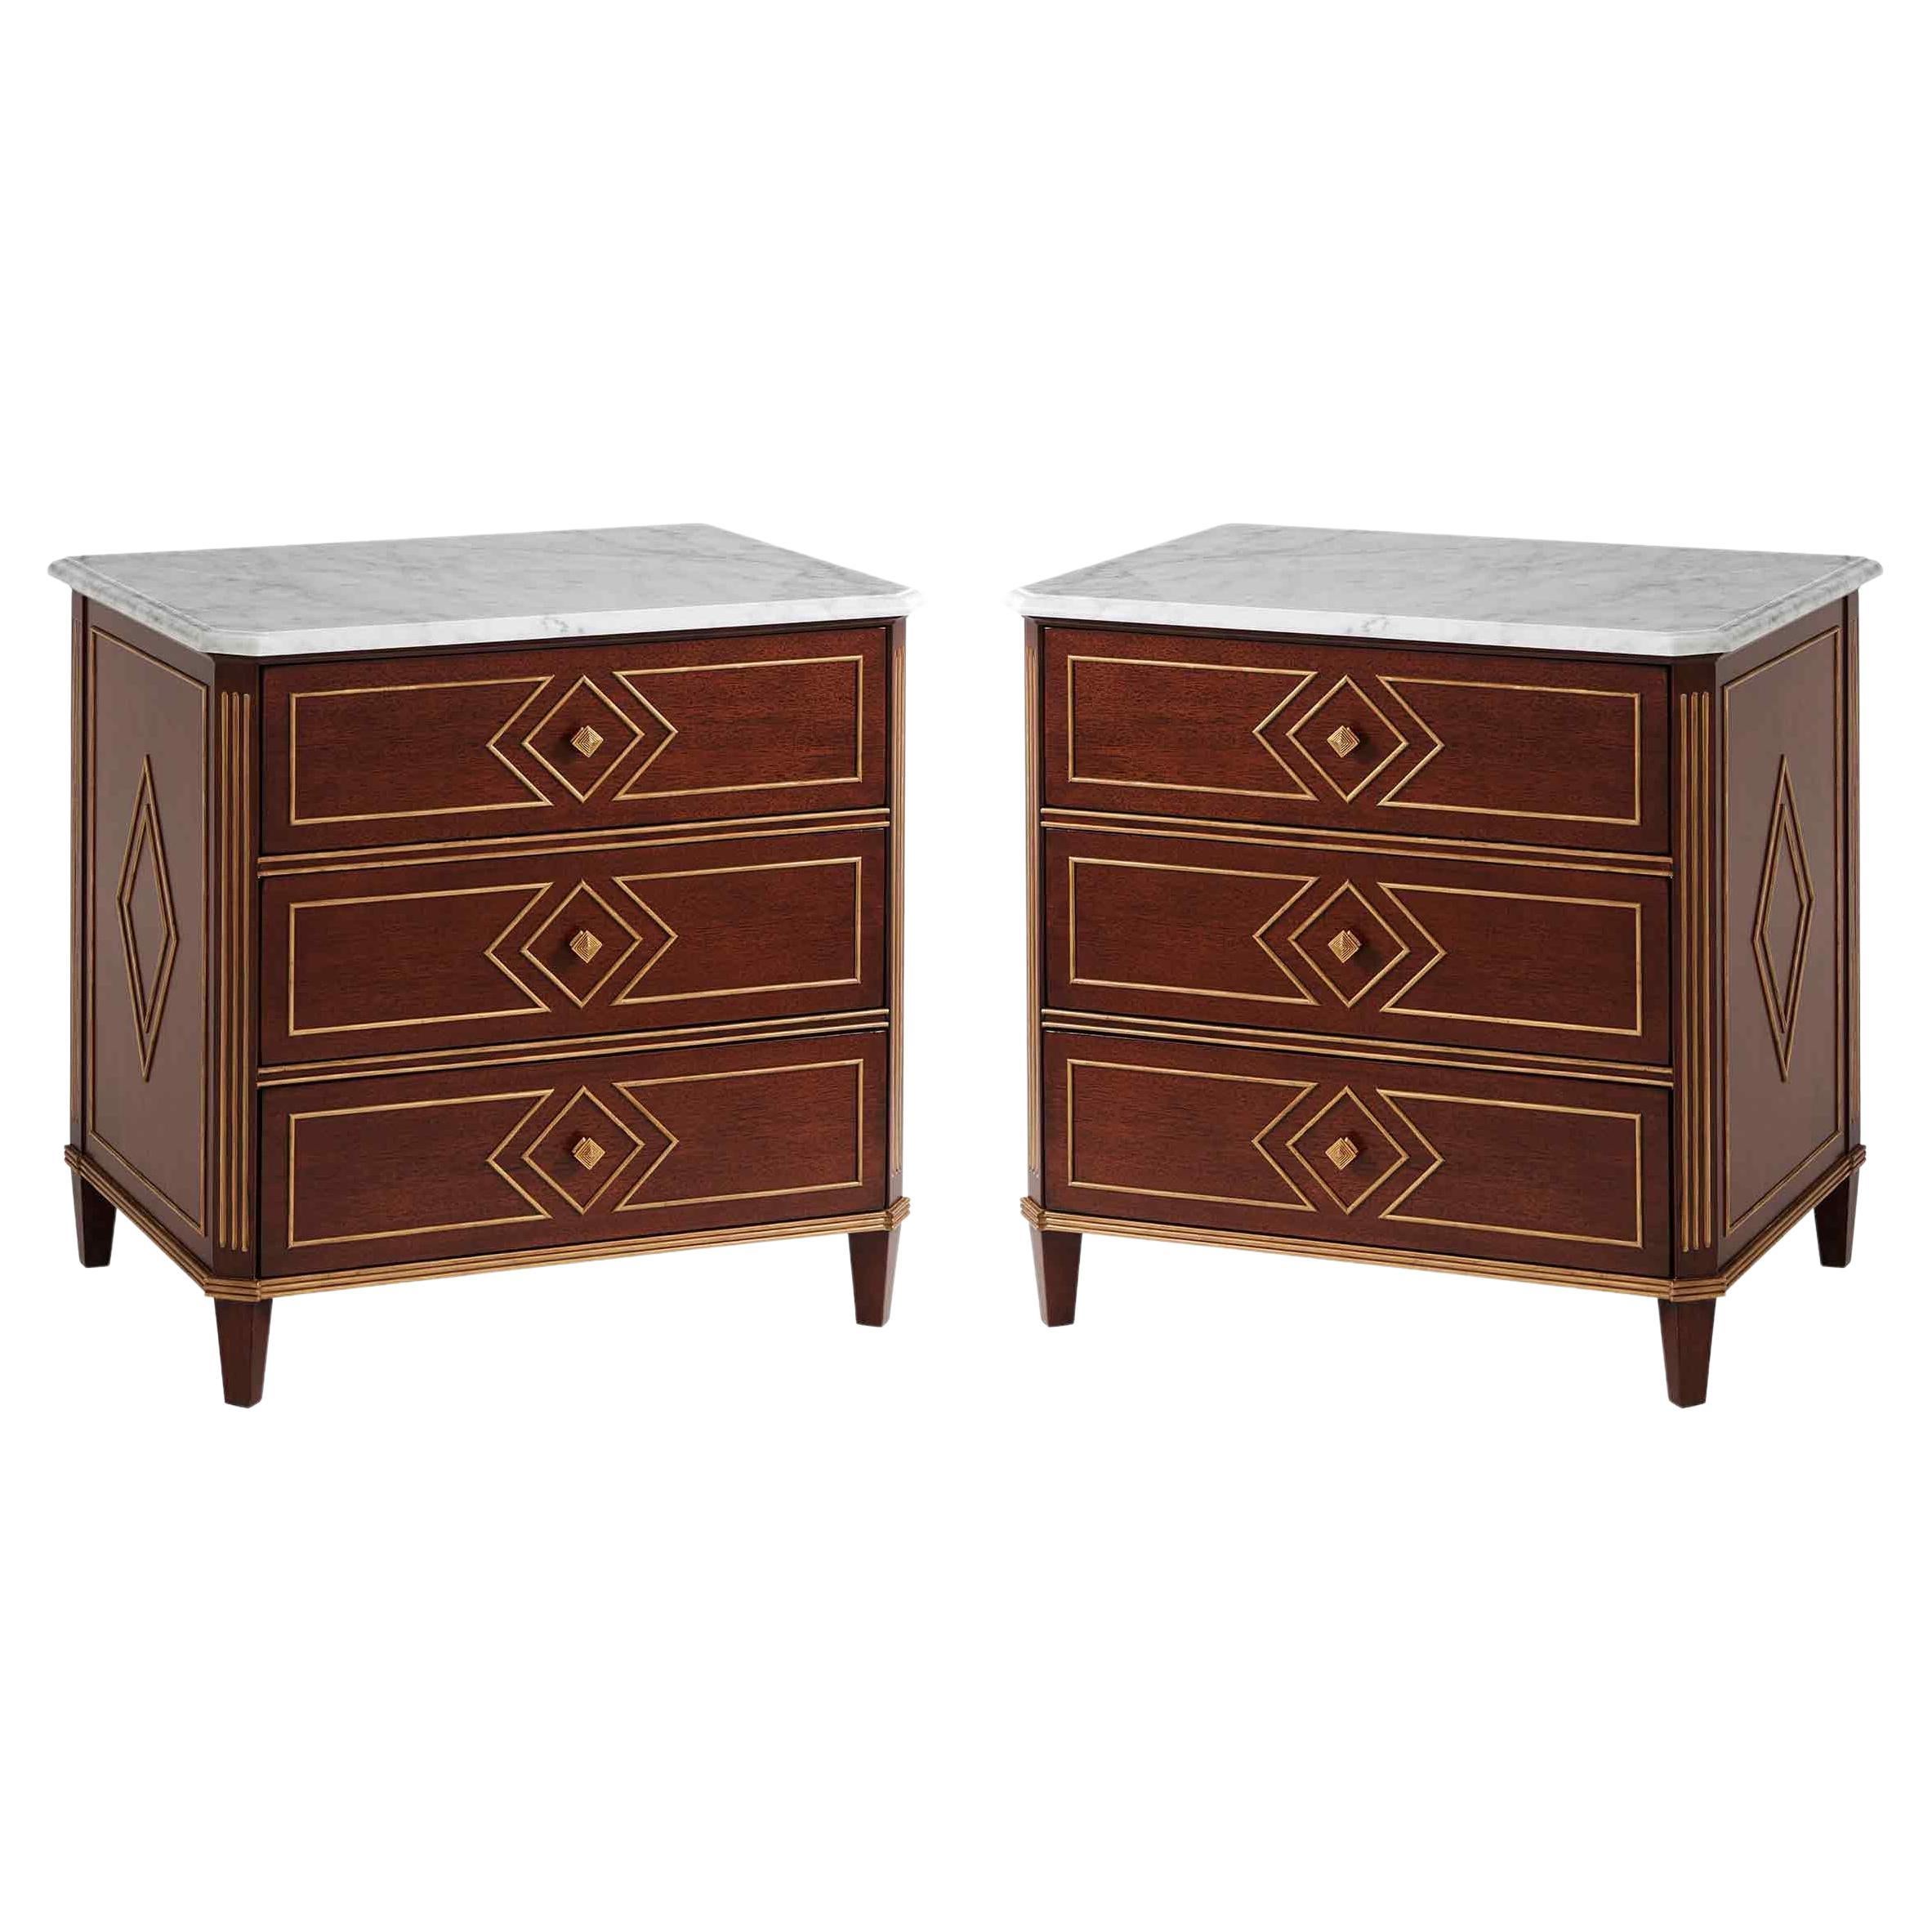 Pair of Russian Neoclassic Style Nightstands